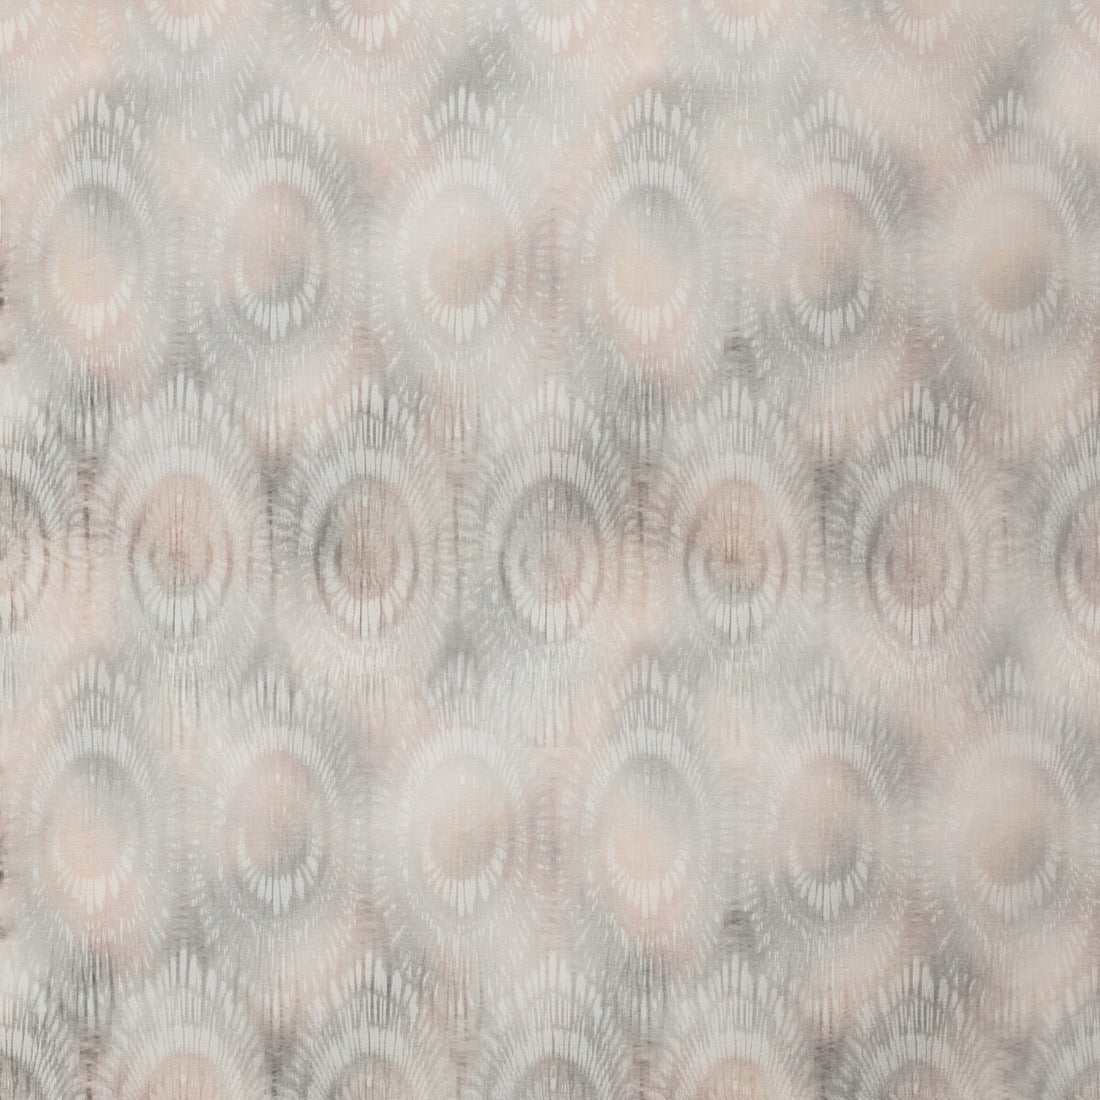 Delta Nile fabric in wisp color - pattern DELTA NILE.16.0 - by Kravet Couture in the Windsor Smith Naila collection